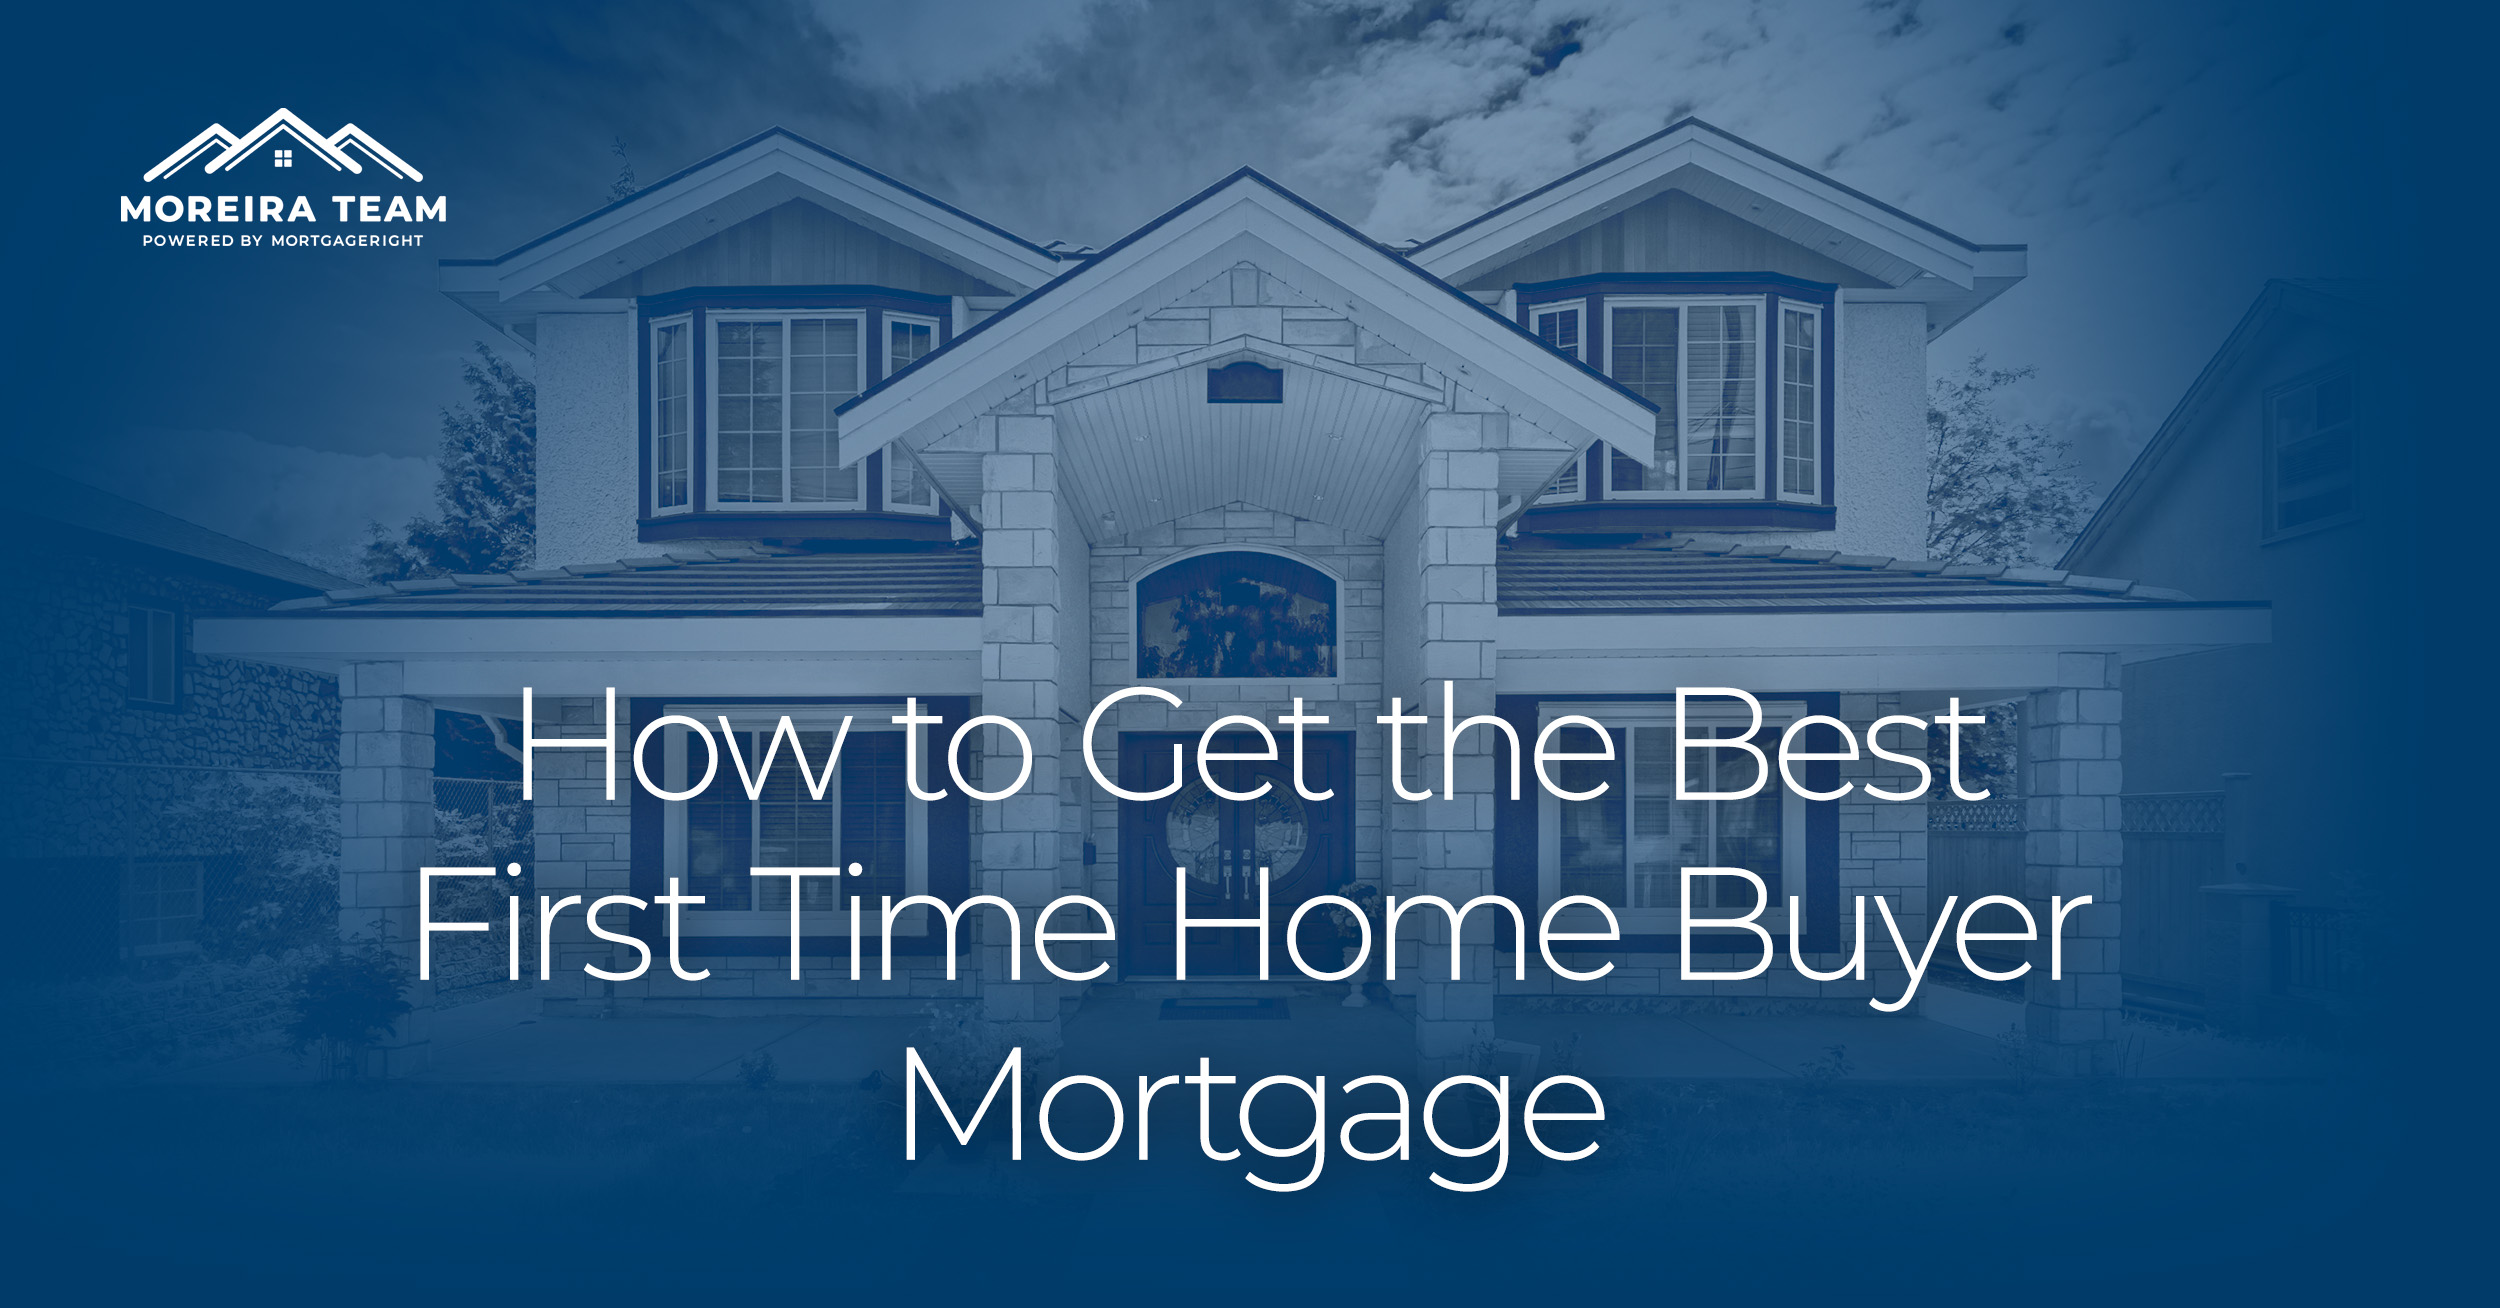 How to Get the Best First Time Home Buyer Mortgage in 2023